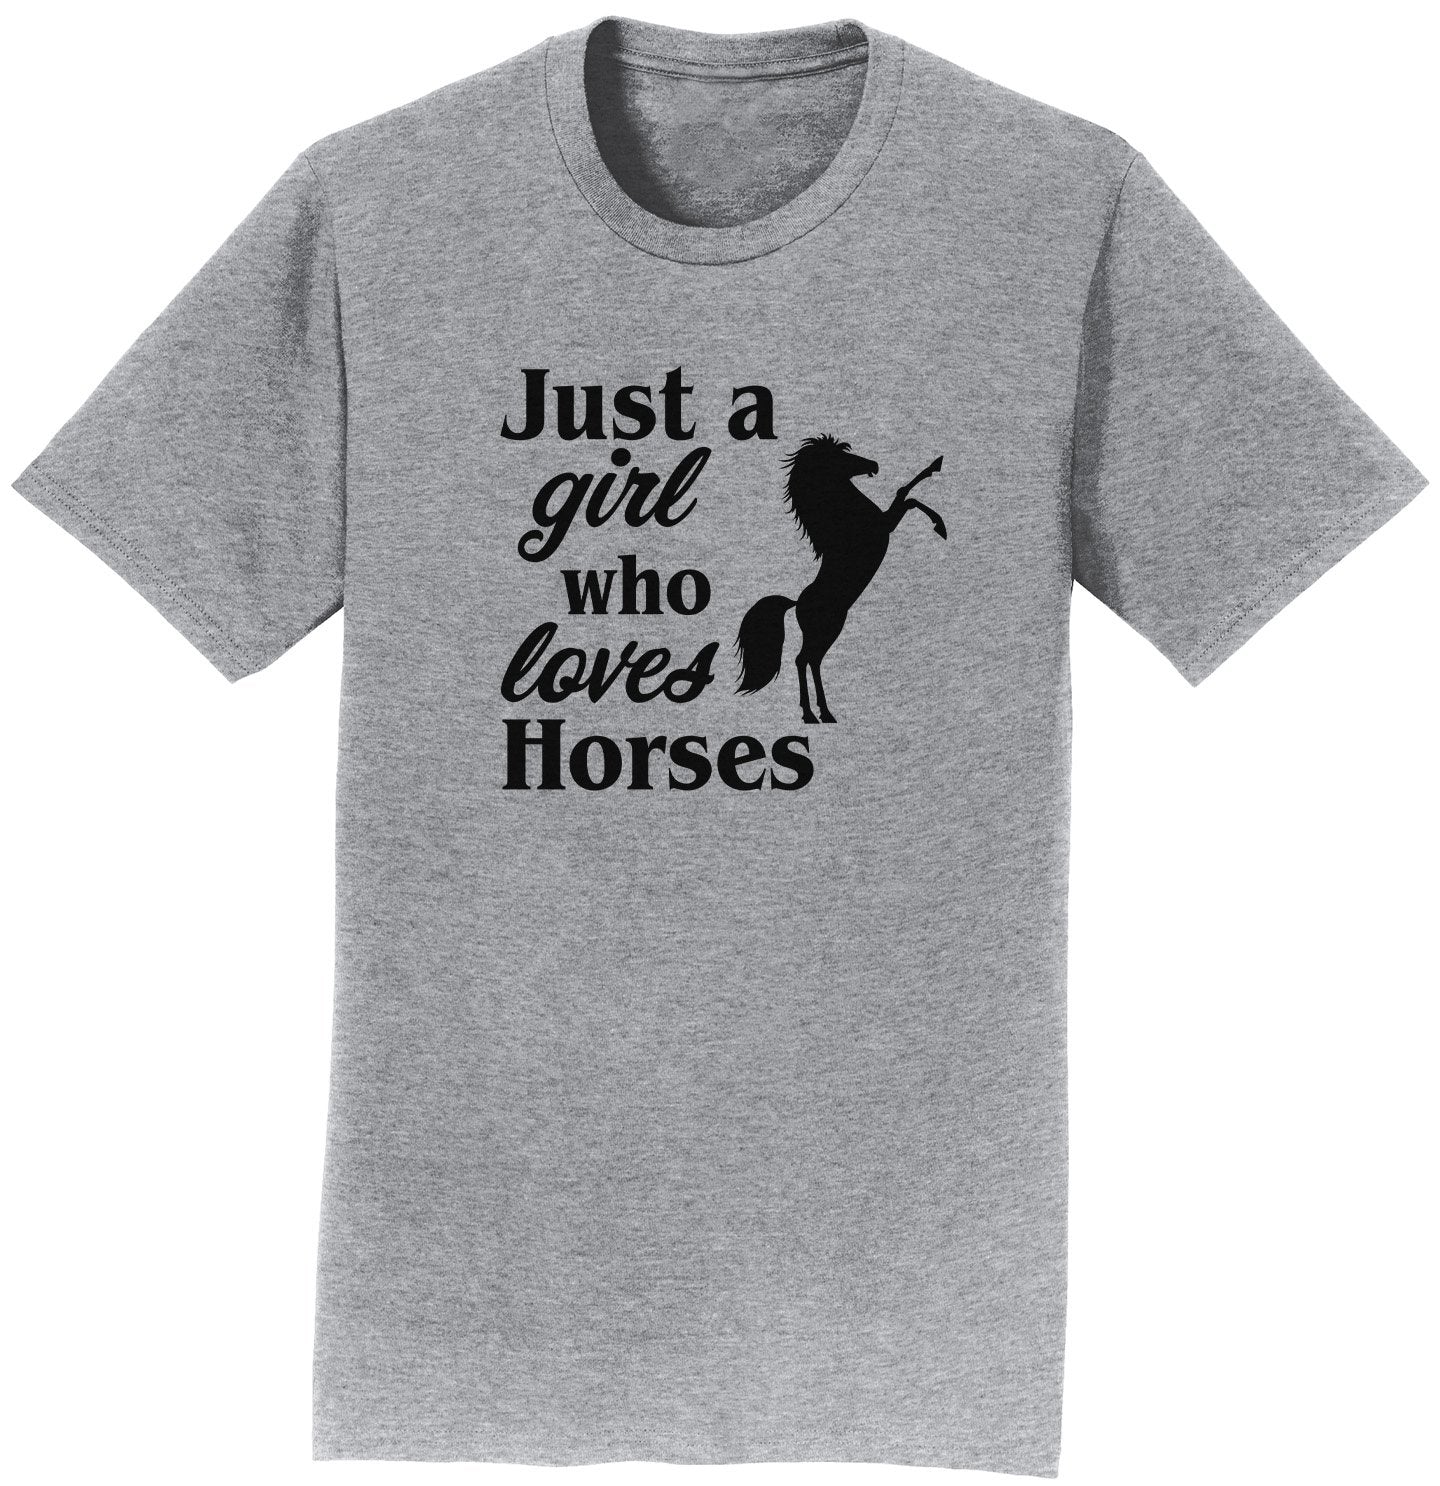 Just A Girl Who Loves Horses Silhouette - Adult Unisex T-Shirt